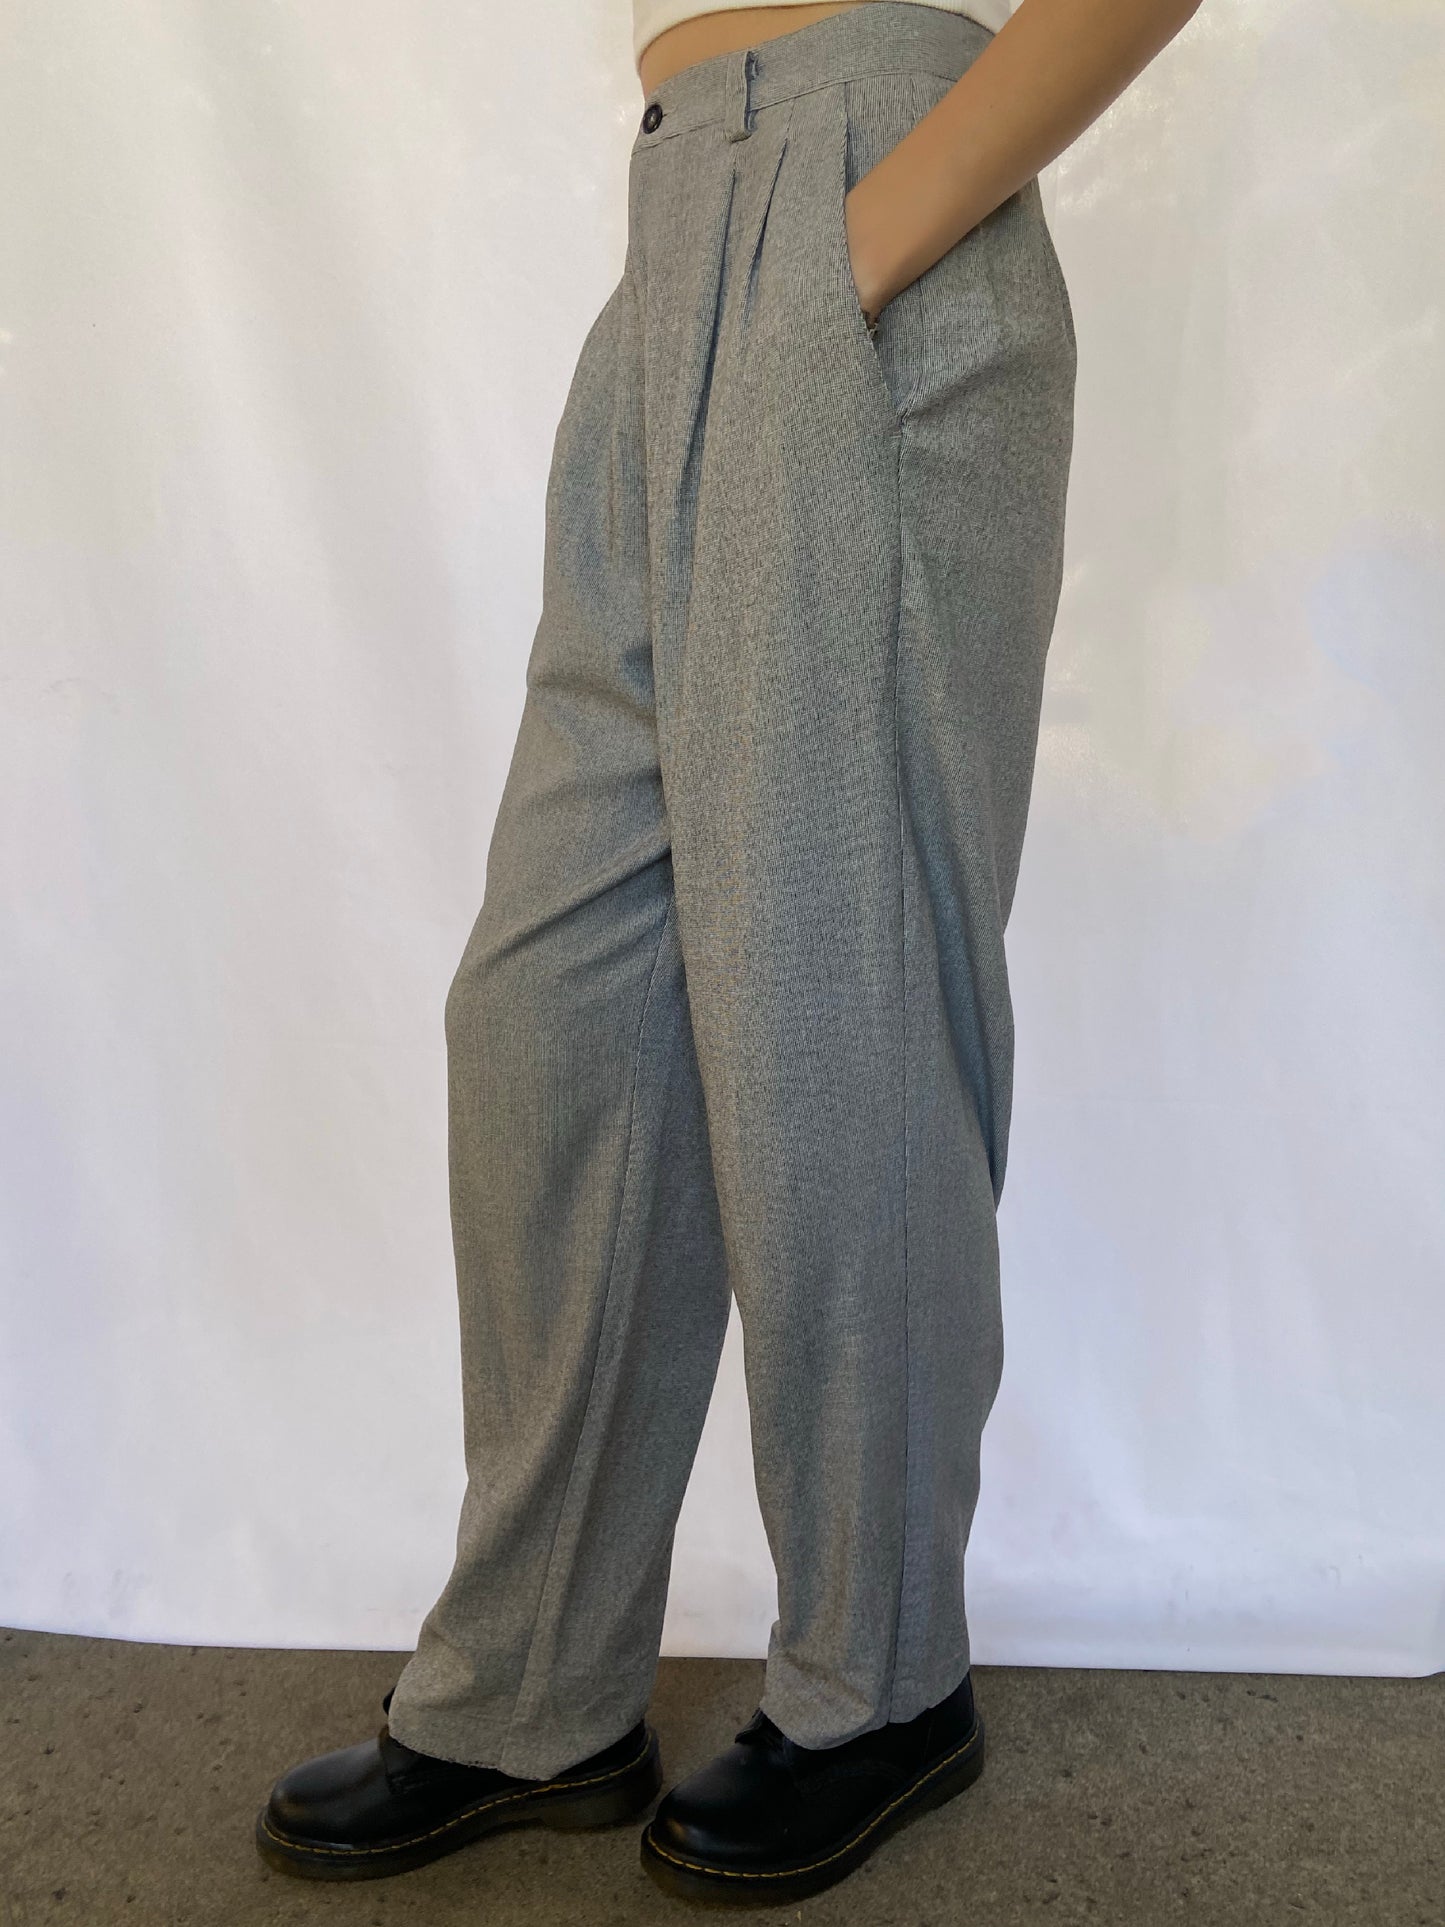 Grey Trousers - 26"